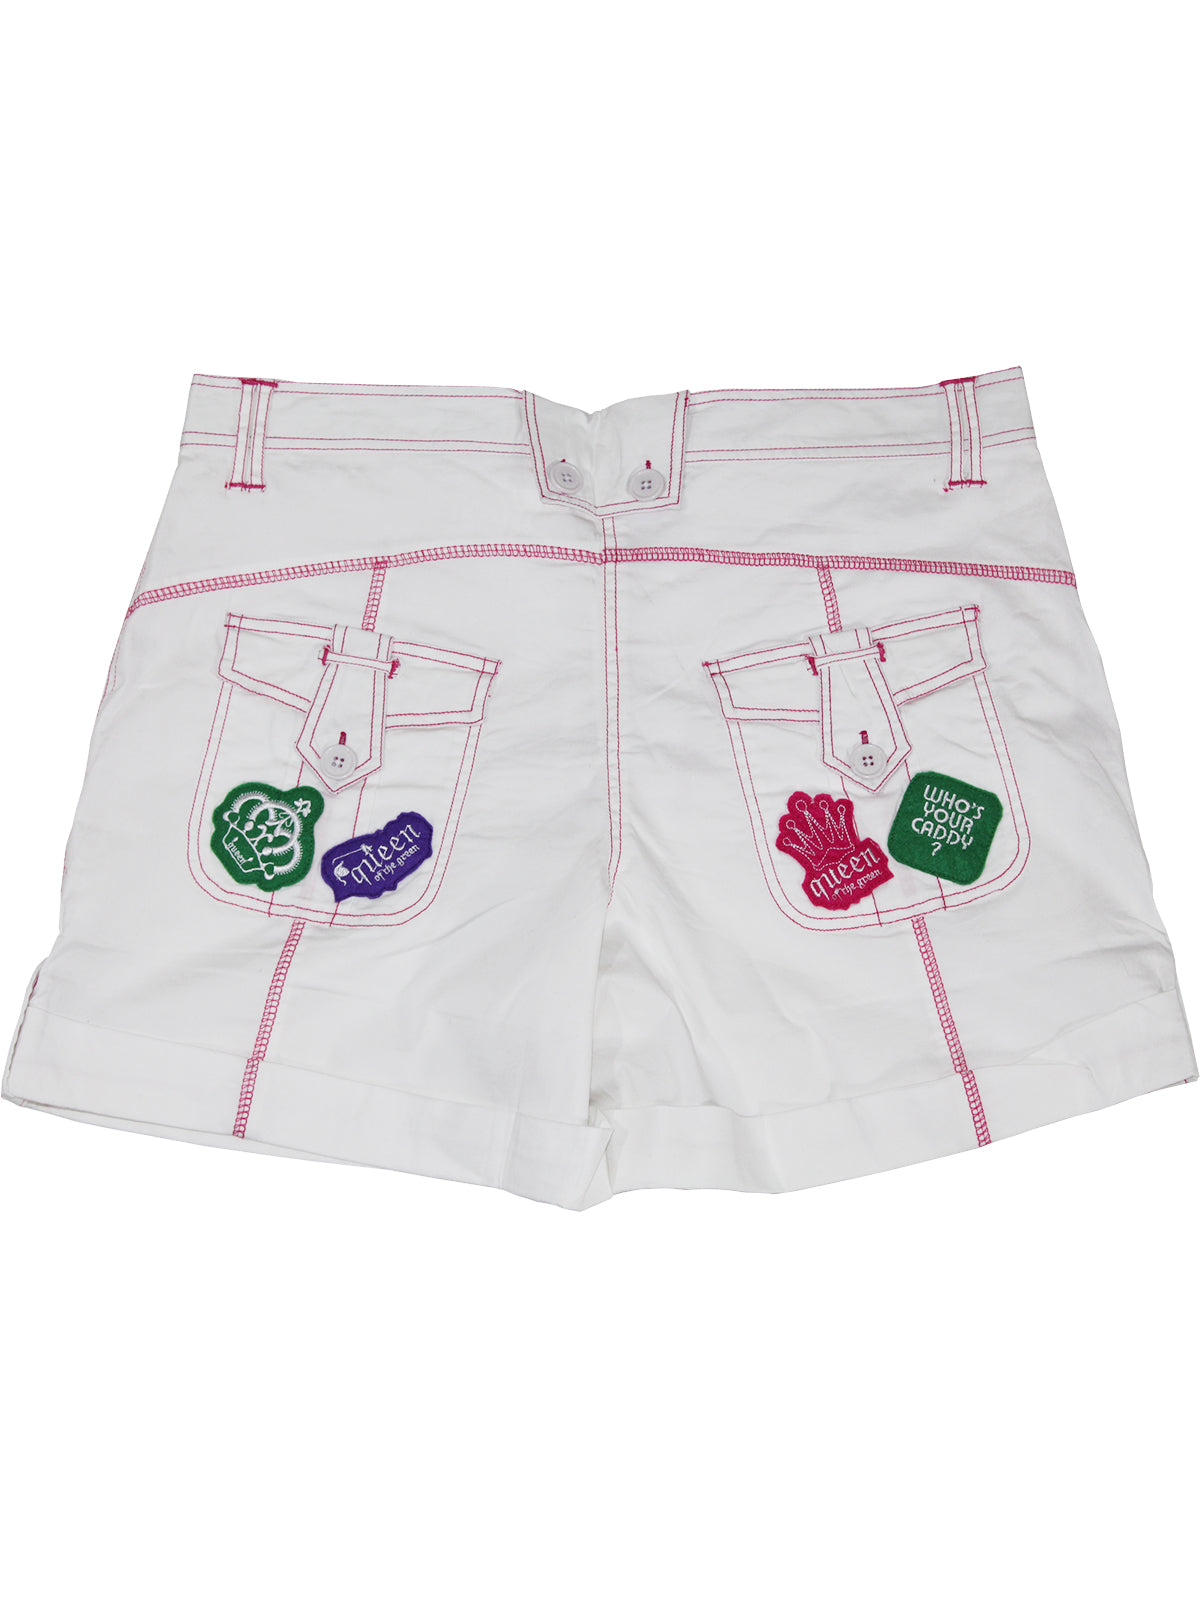 Queen of the Green White Womens Golf Shorts - Back